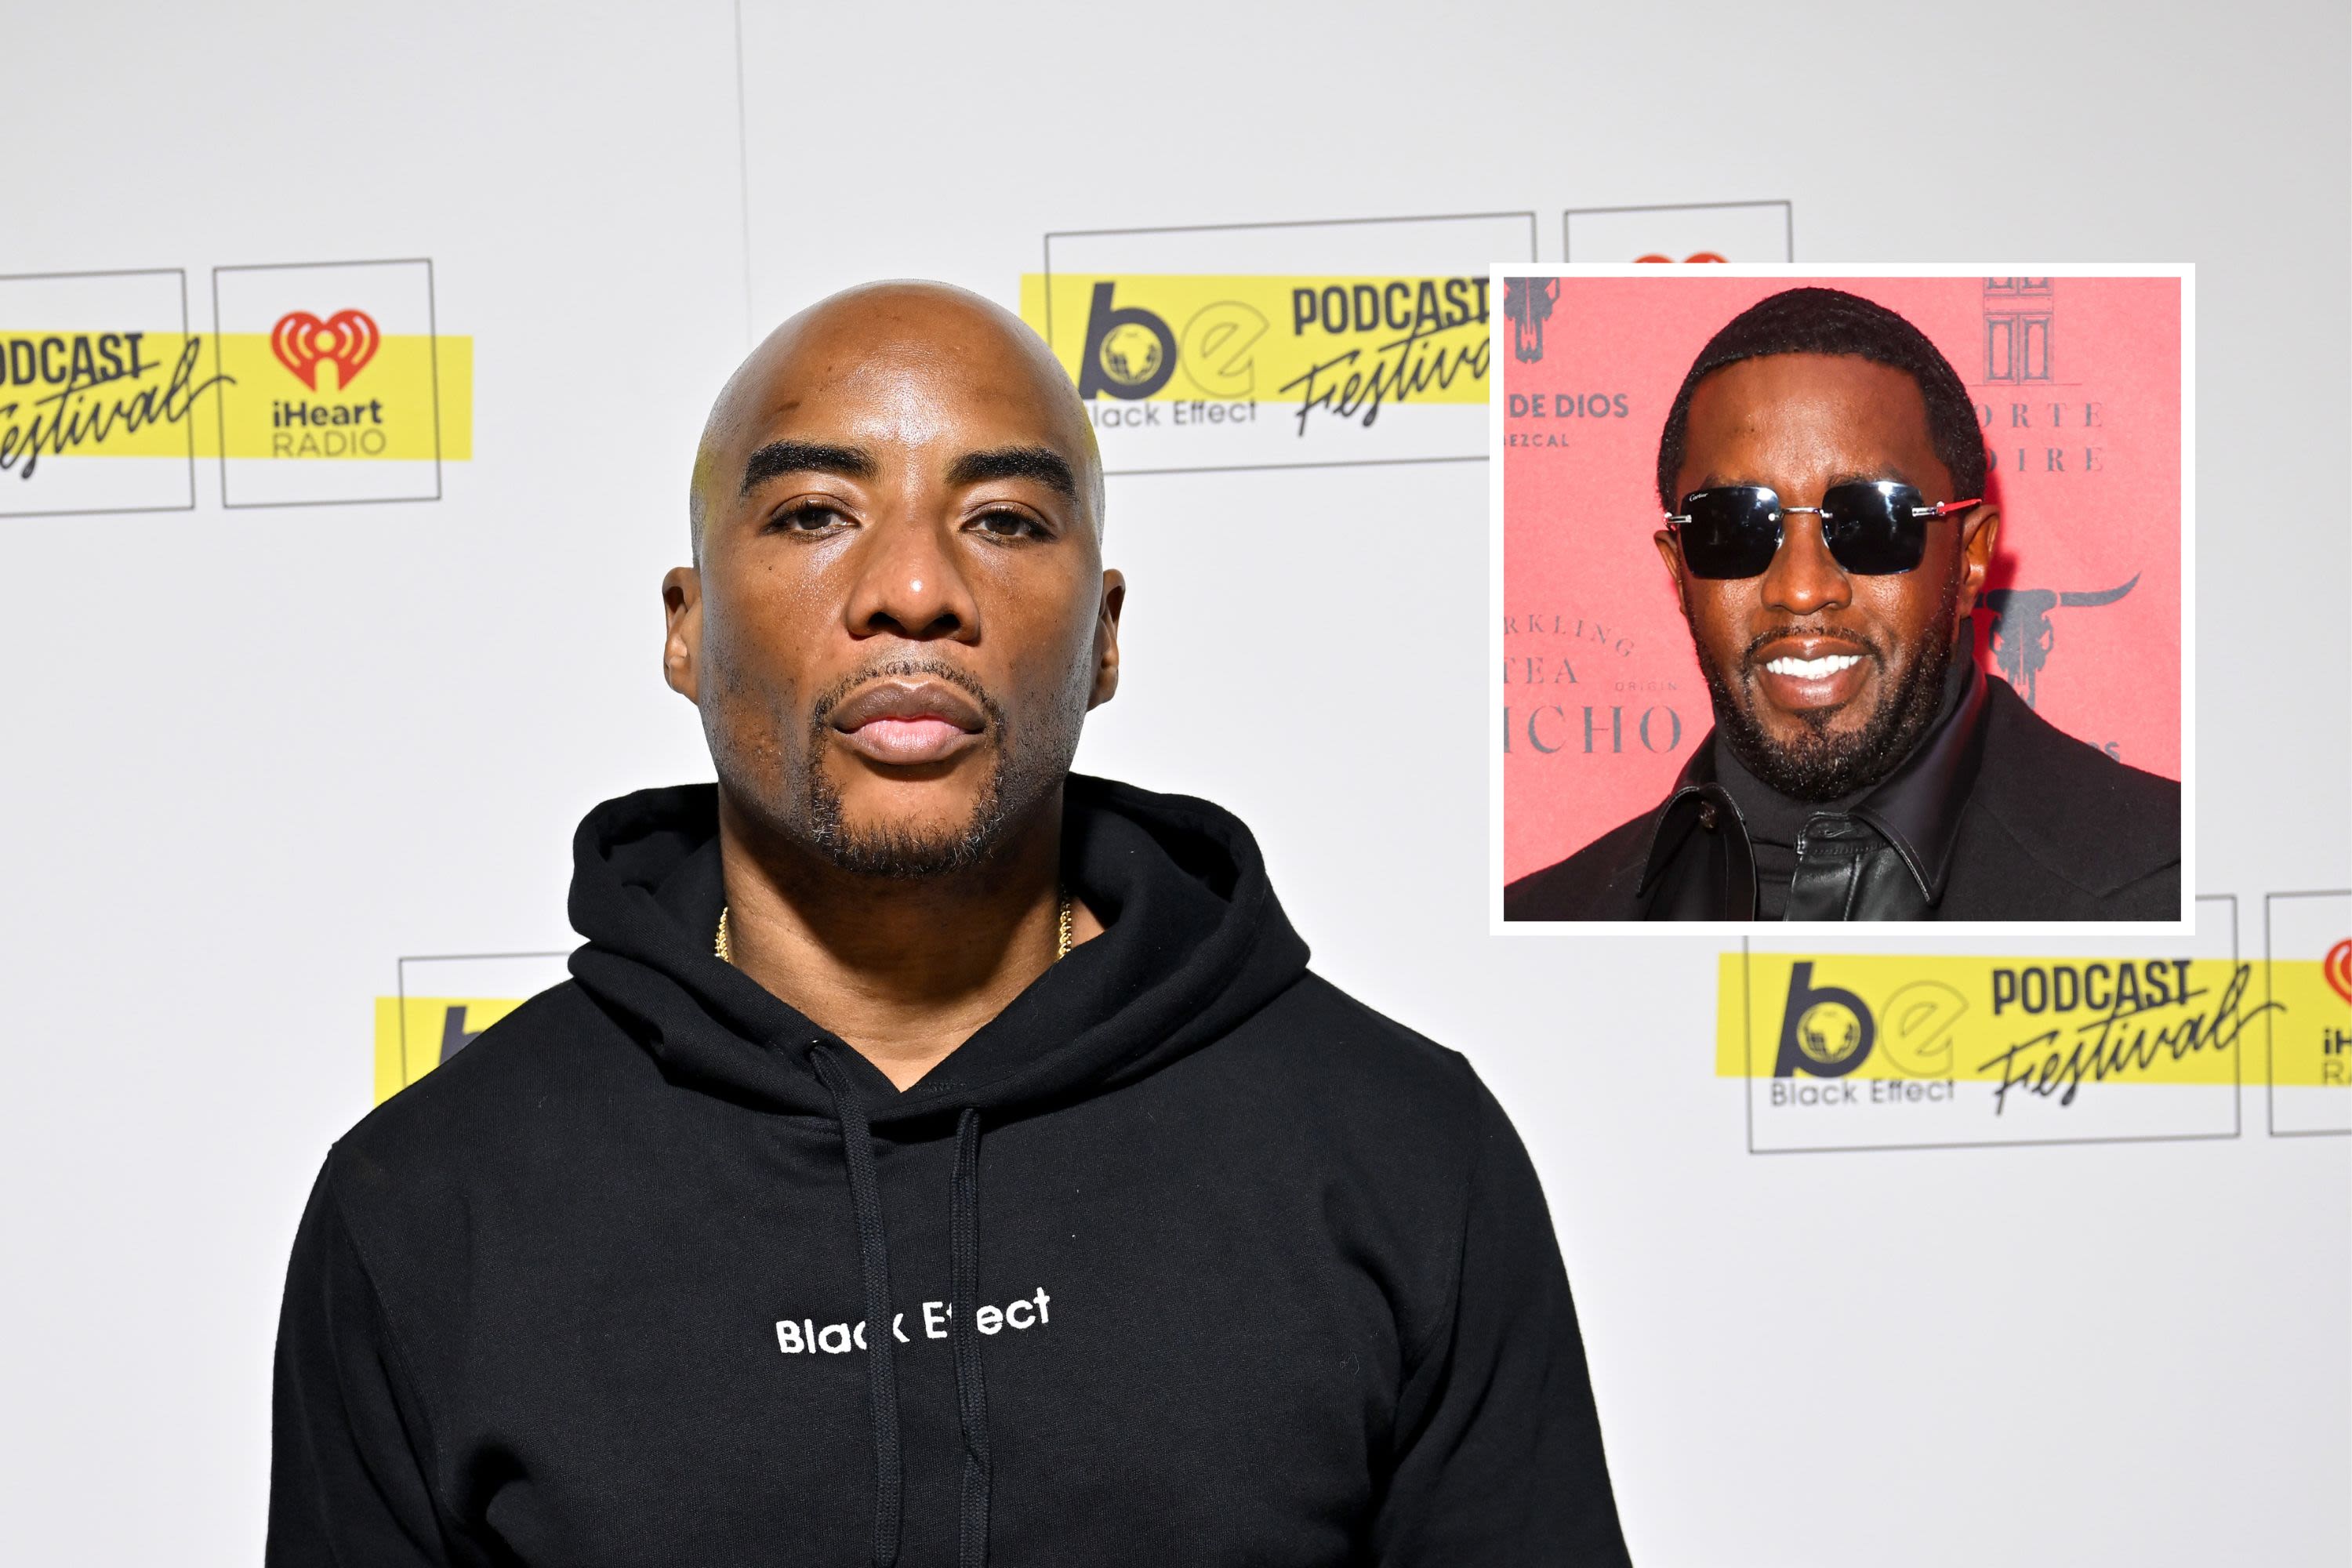 Charlamagne Tha God calls for domestic violence awareness after Diddy video